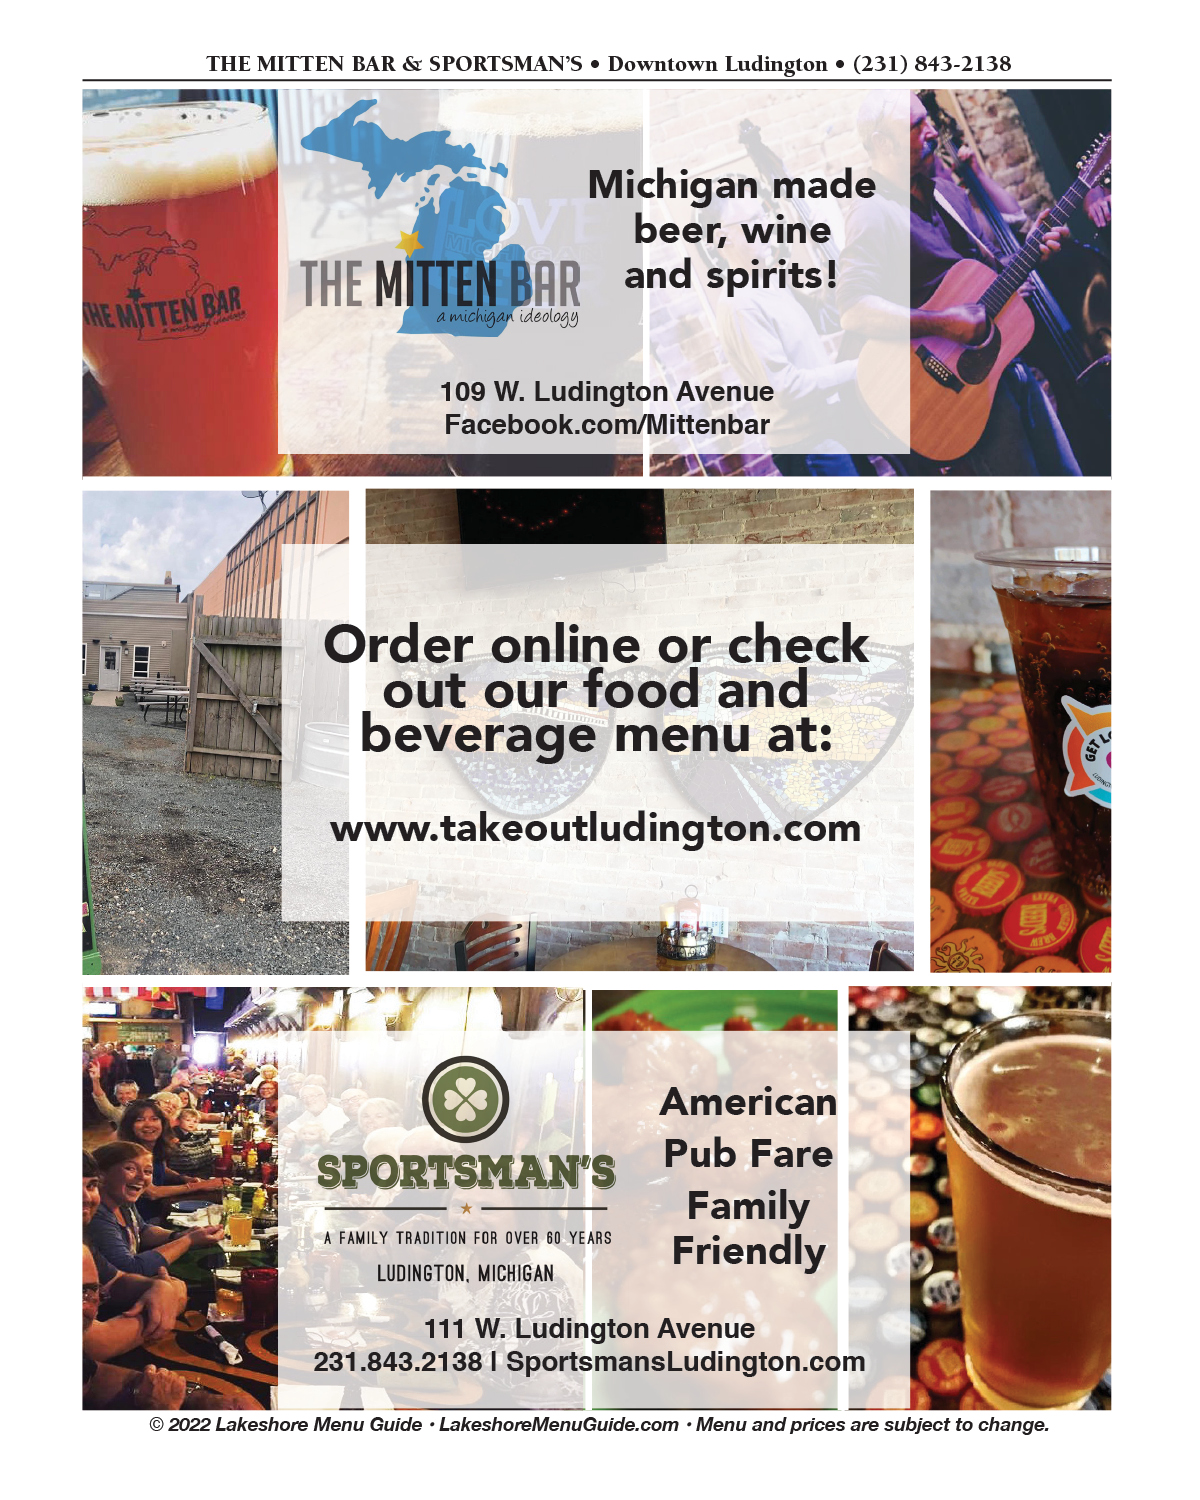 Menu for Sportsmans Irish Pub and The Mitten in downtown Ludington from the Lakeshore Menu Guide